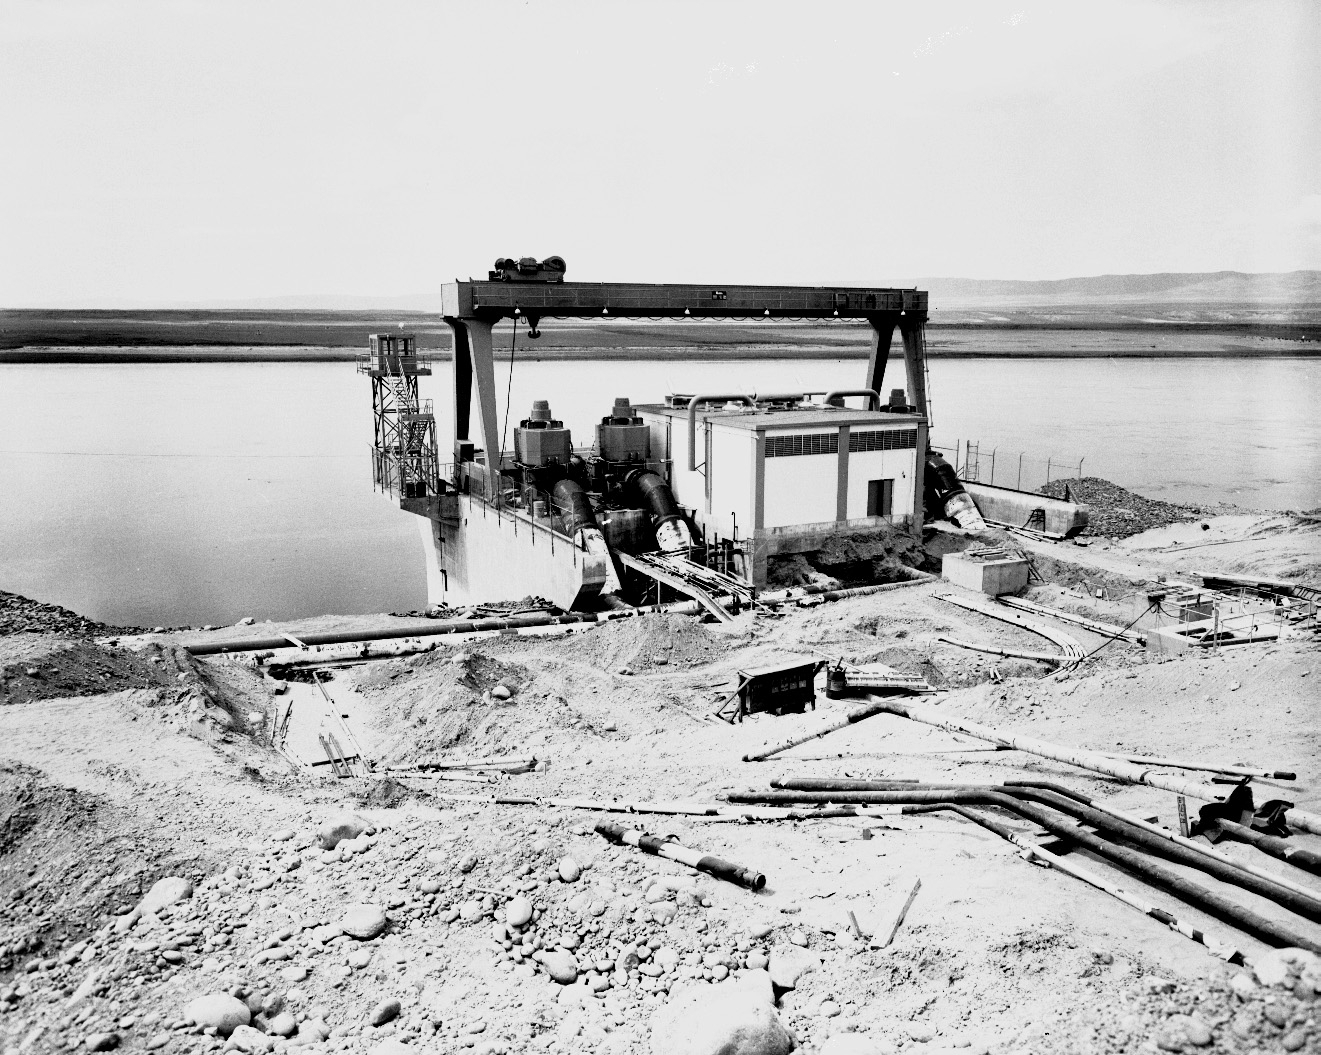 181N construction days
Found this photo dated May 17, 1960.  I believe it's the river pump house, 181N.
